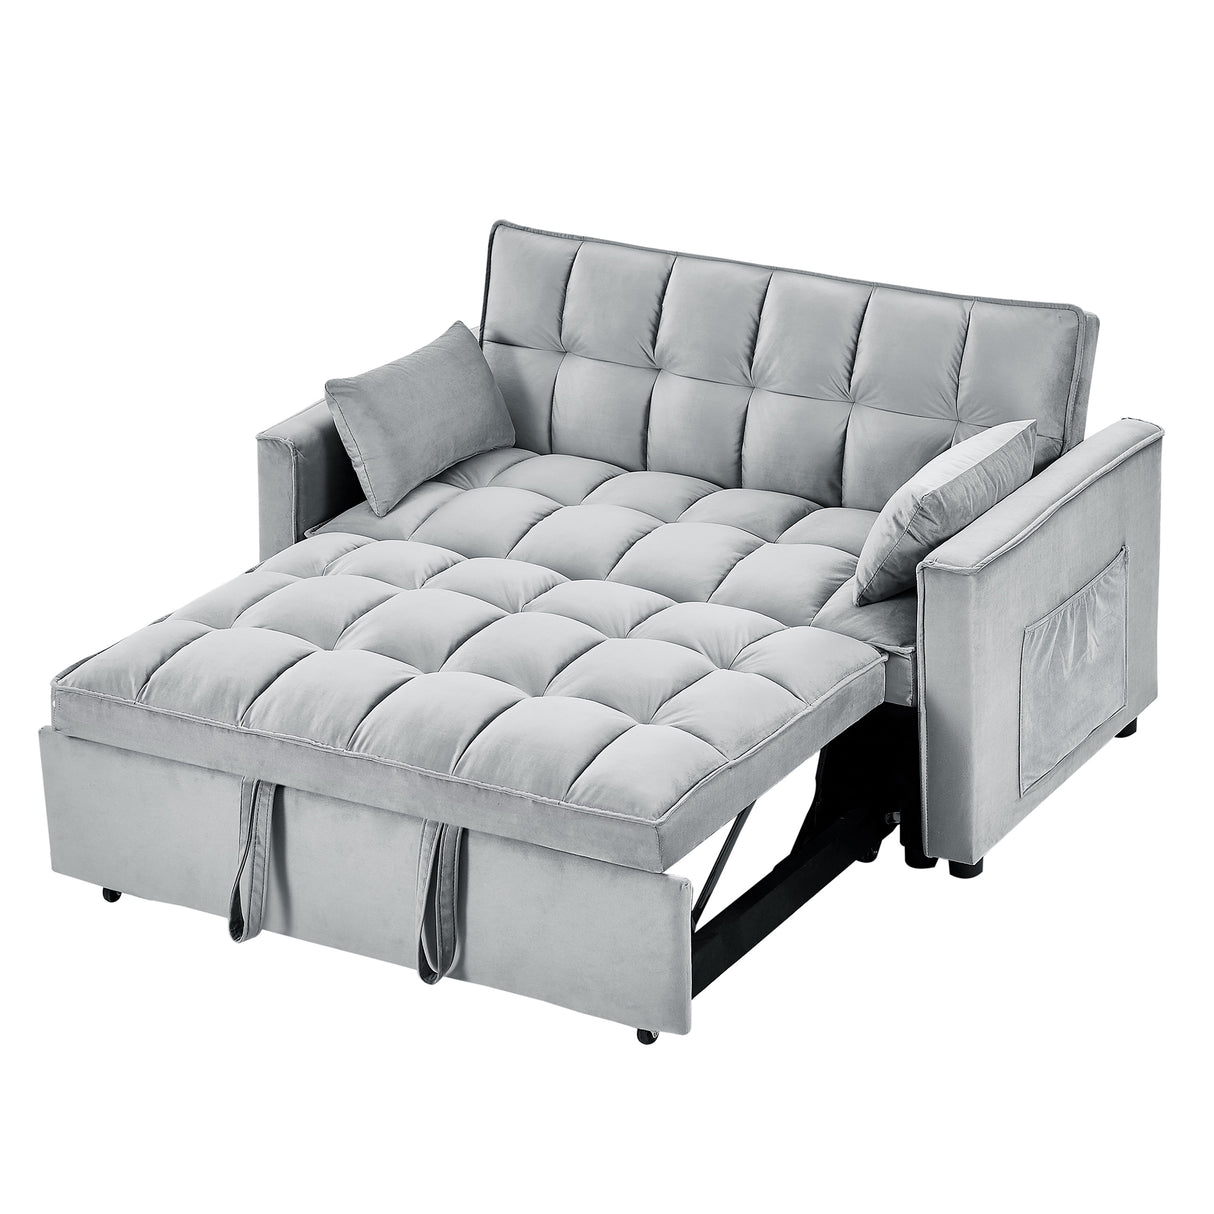 Sleeper Sofa Couch W Pull Out Bed 55